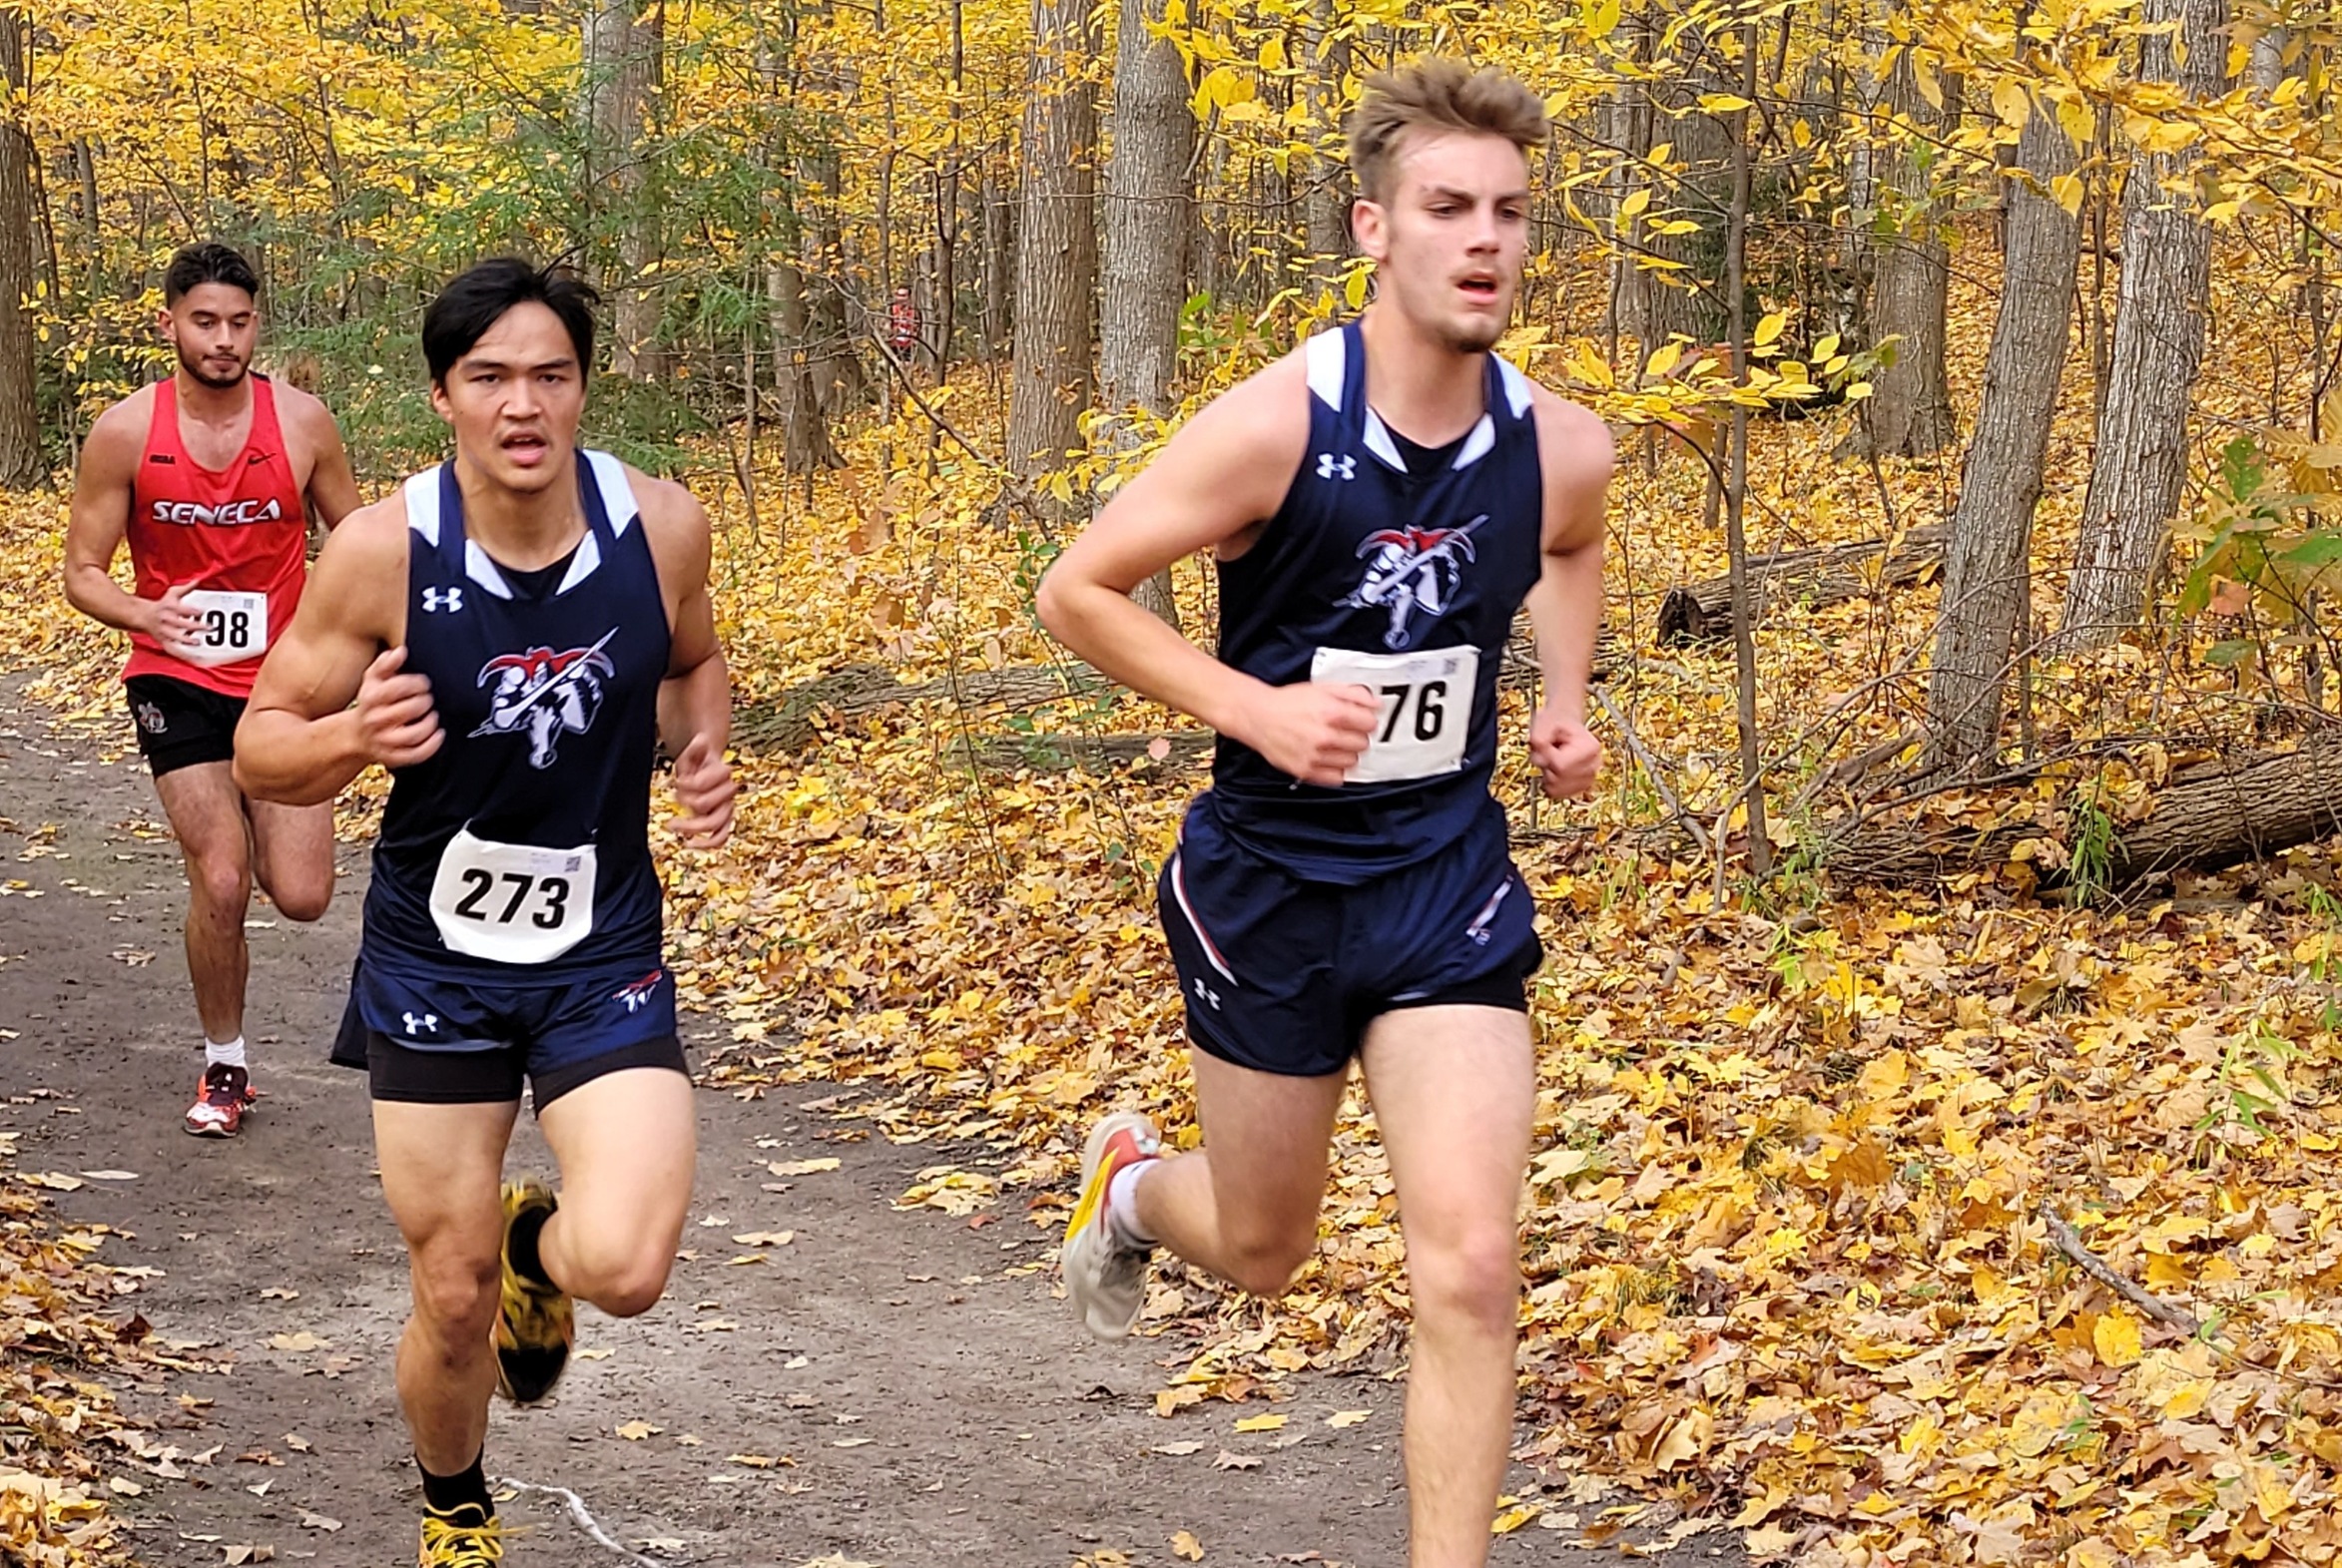 X-COUNTRY TEAM TURNS IN THEIR BEST TEAM PERFORMANCE AT CHAMPIONSHIPS